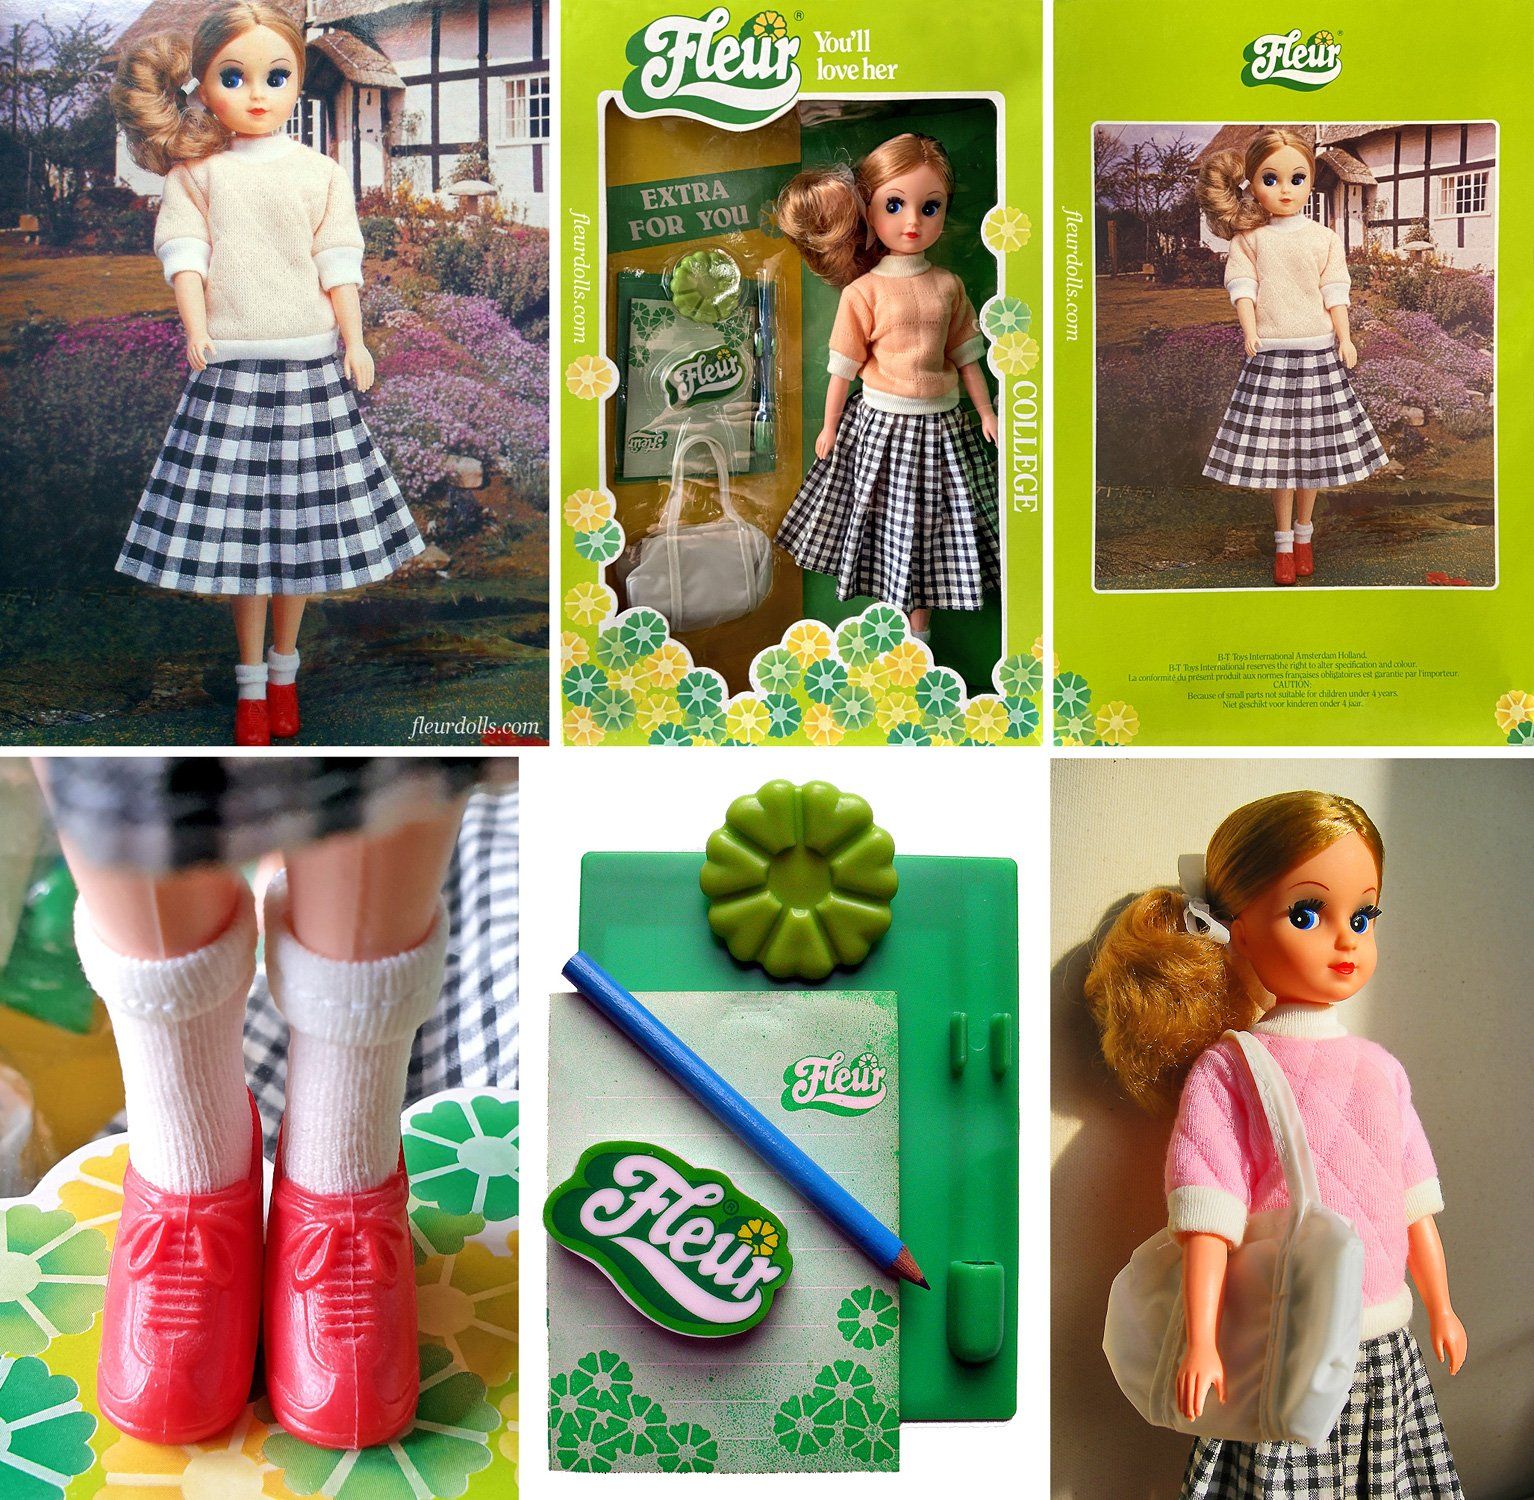 College Fleur doll by Otto Simon wearing black and white checkered dress and pink or yellow sweater.